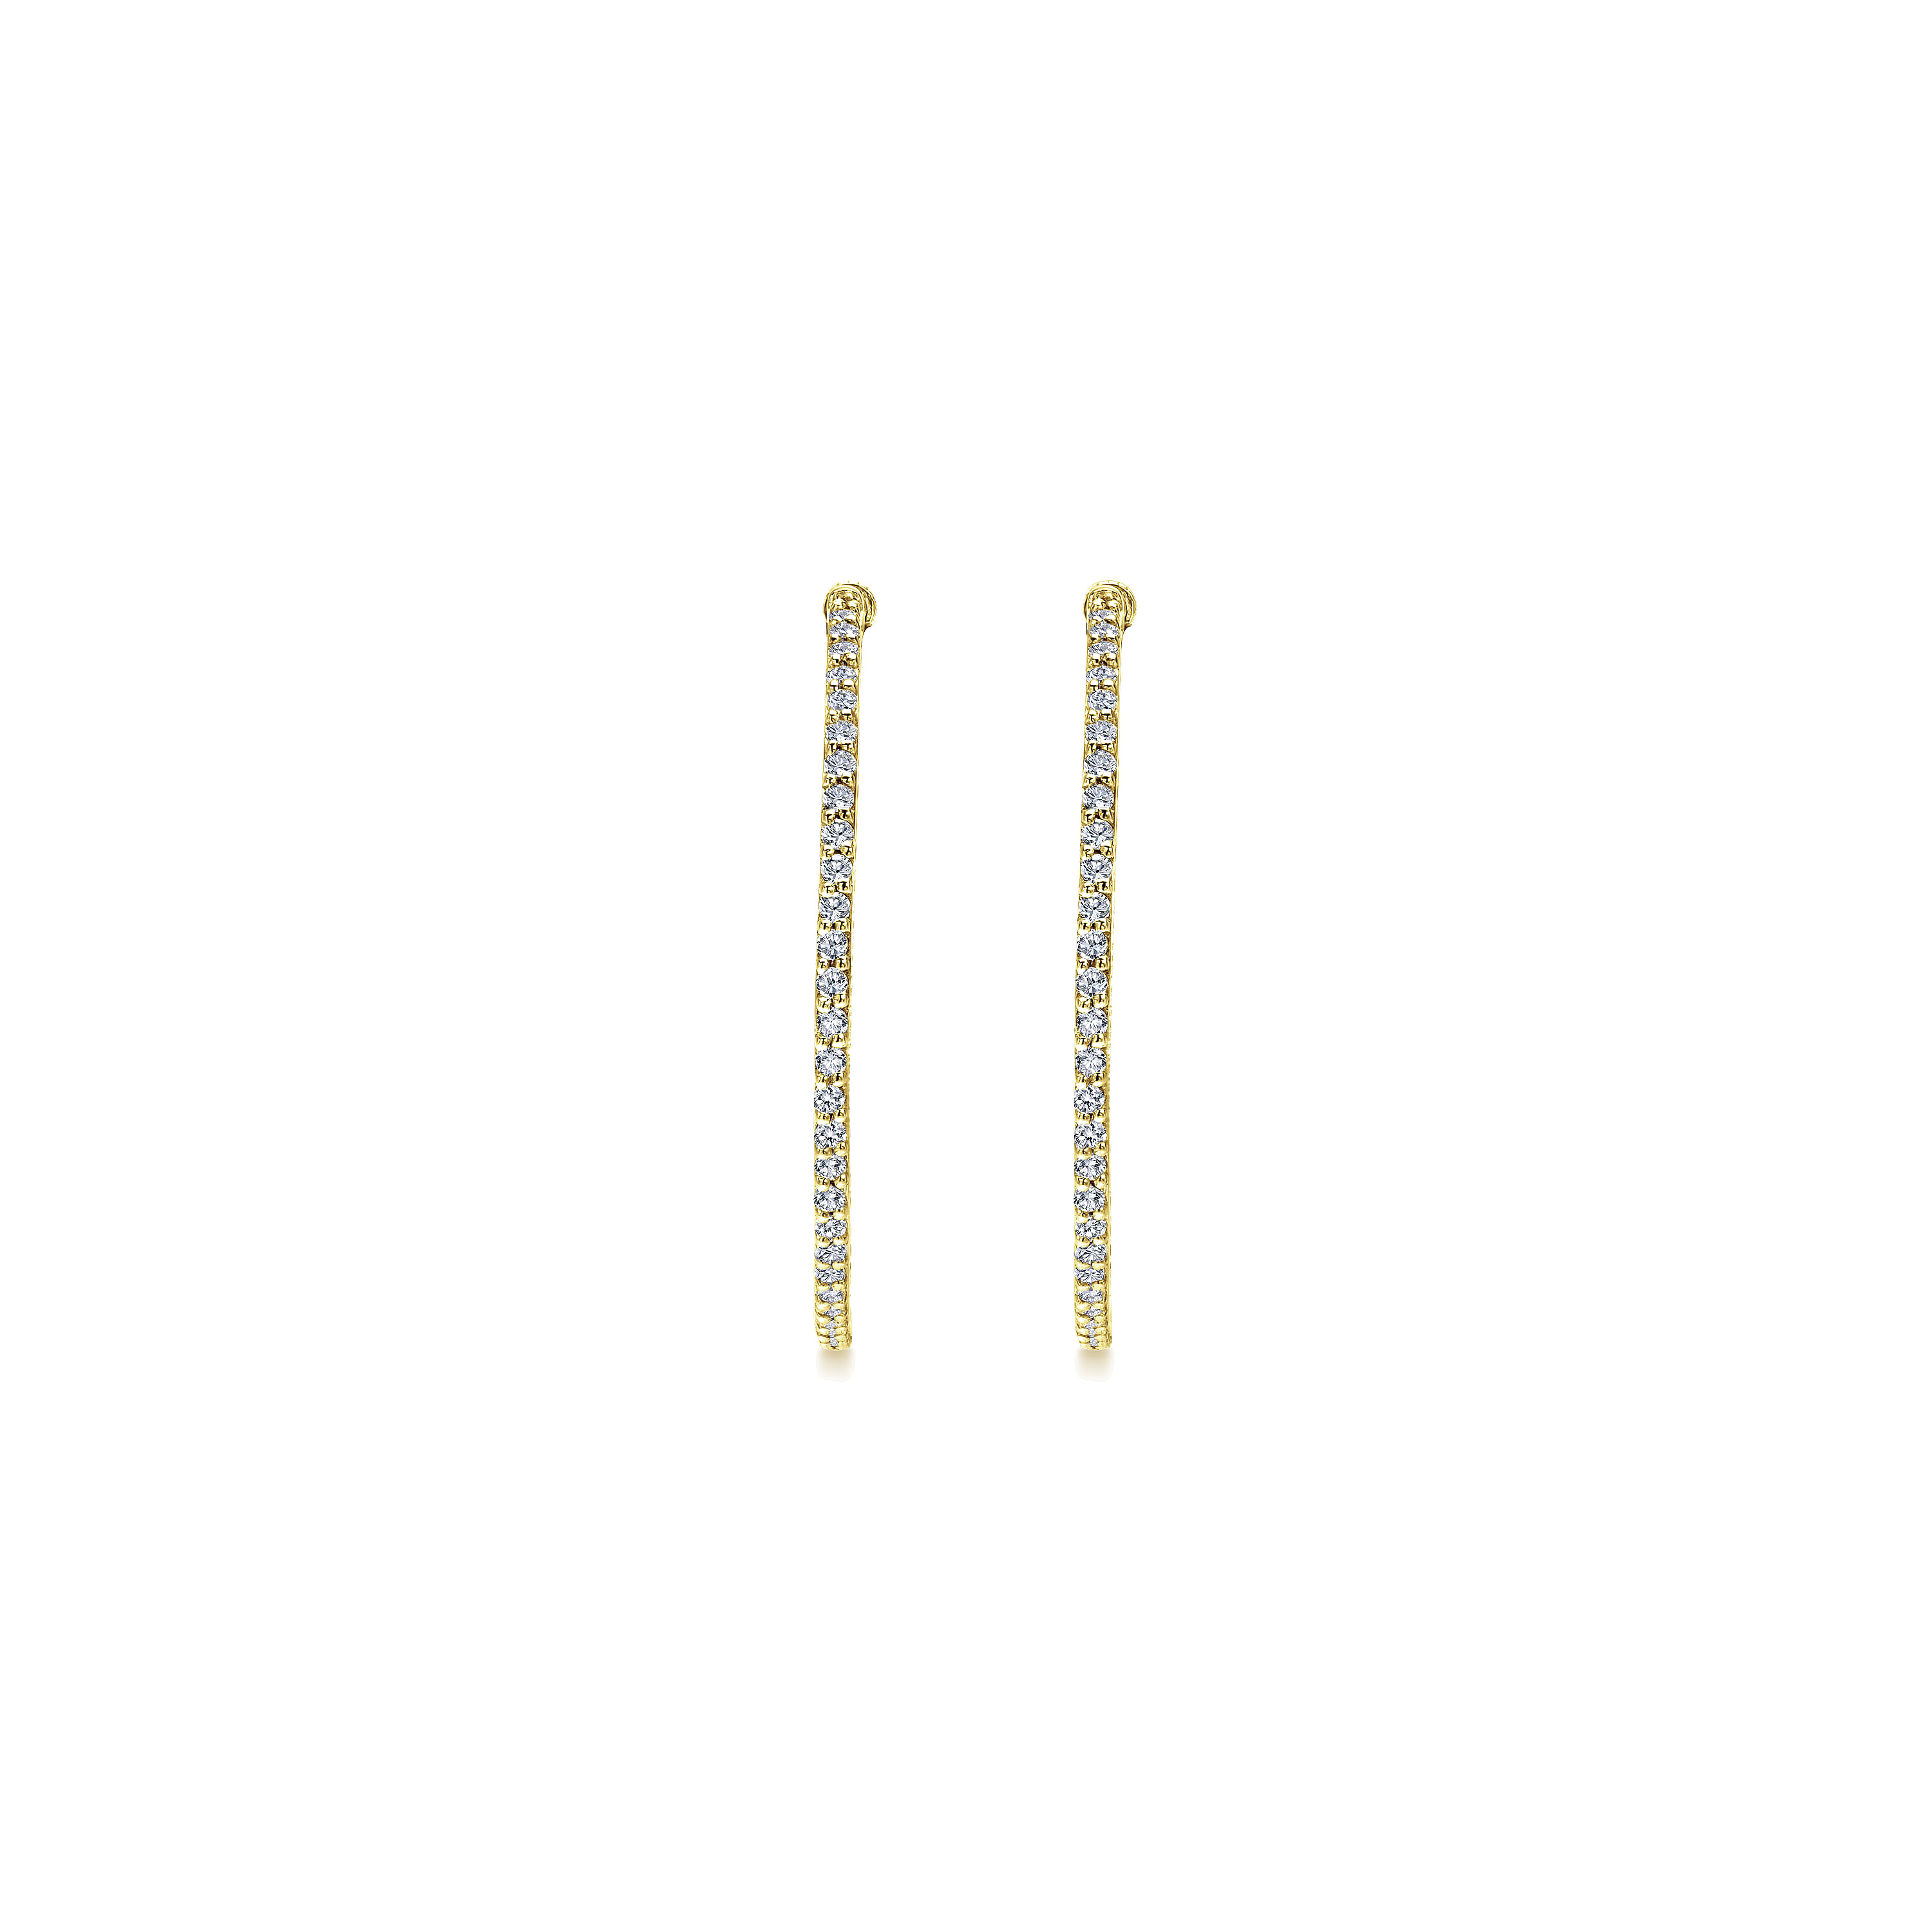 14K Yellow Gold Prong Set 40mm Round Inside Out Diamond Hoop Earrings